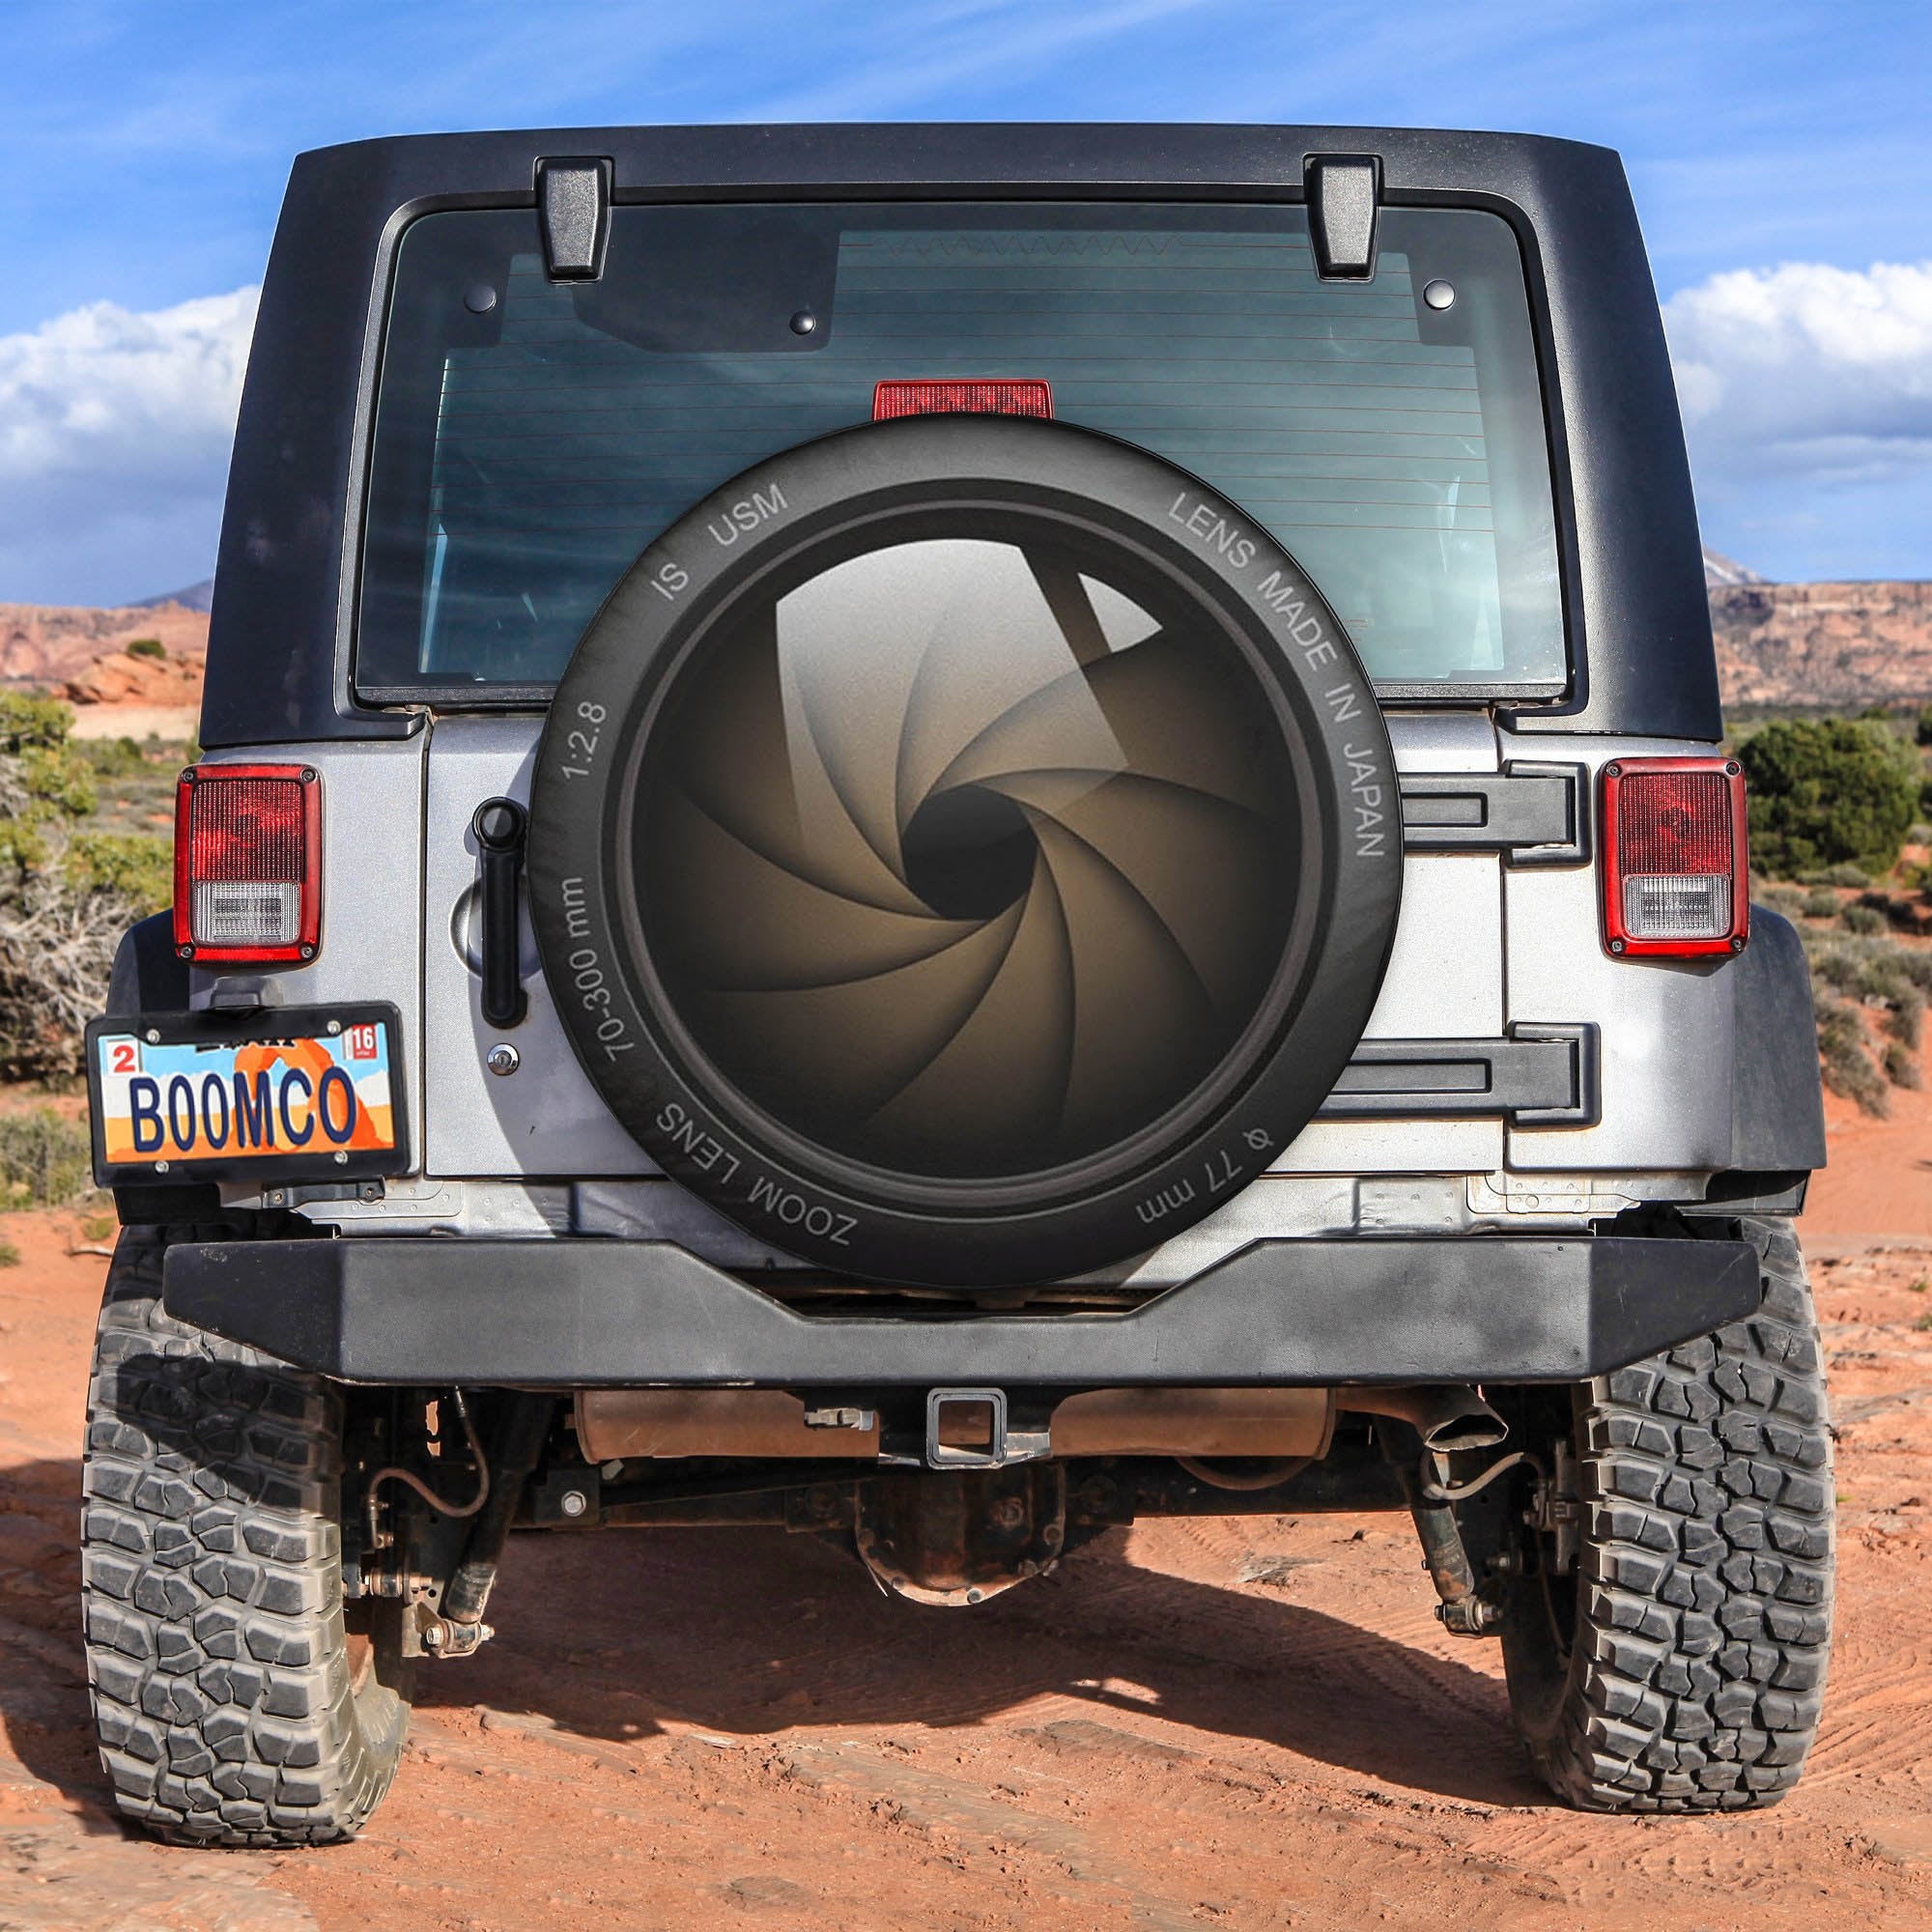 Camera Len Zoom Focus Spare Tire Covers Gift For Campers